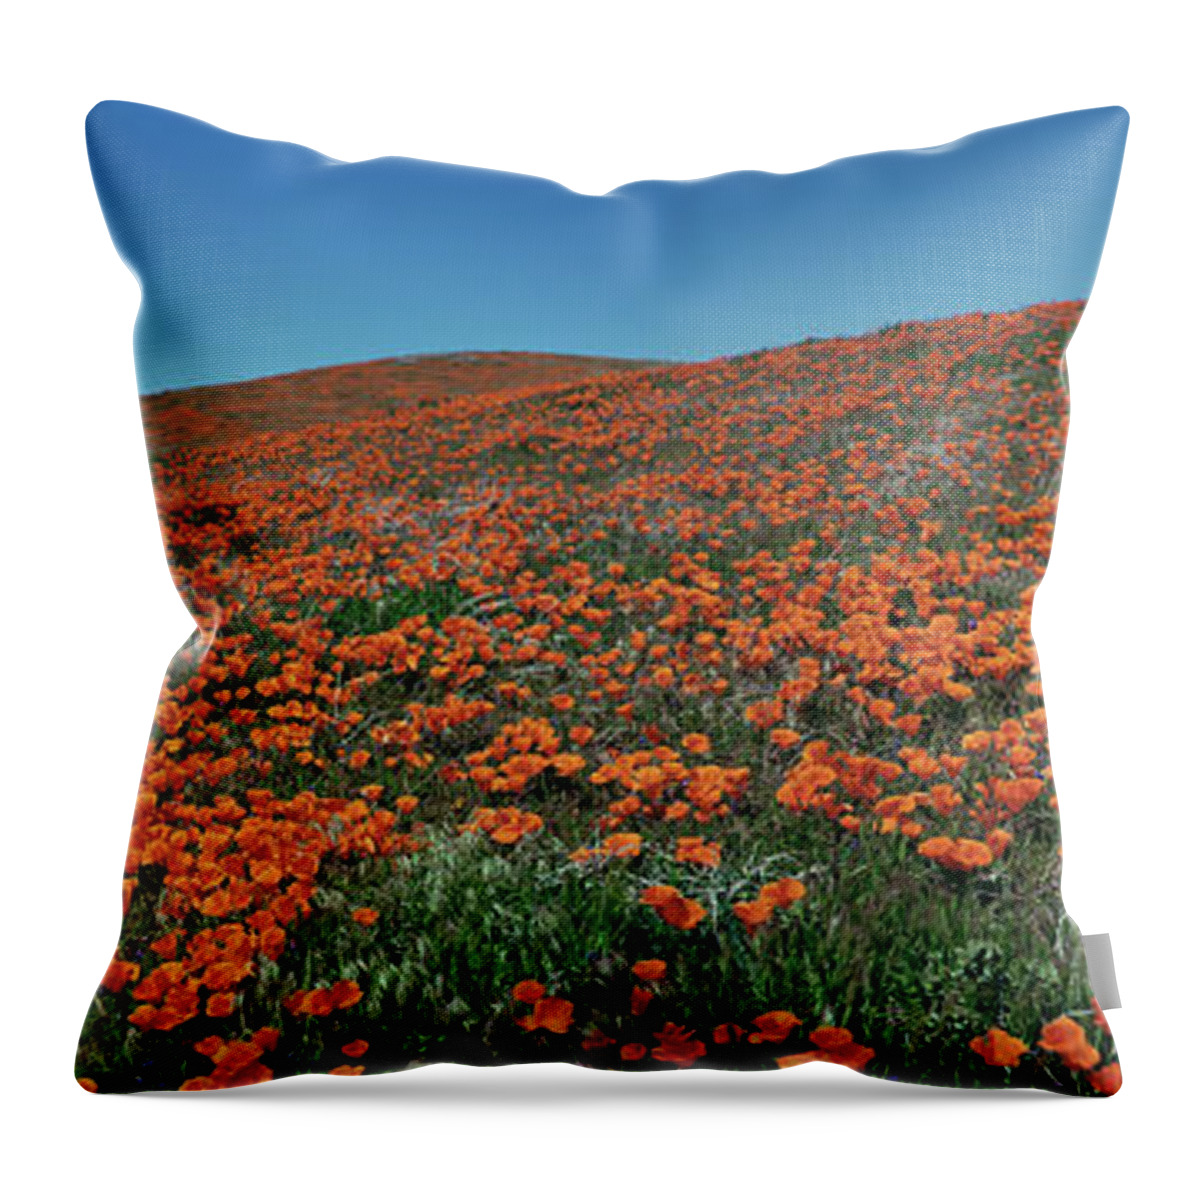 Tom Daniel; Photo; Photography; Photographer; Tom Daniels; California; Ca; Usa; West; American West; Flower; Flowers; Wildflower; Wildflowers; Bloom; Horizontal; Lancaster; Poppy; Poppies; Antelope Valley; State Flower Throw Pillow featuring the photograph Antelope Valley Poppy Reserve by Tom Daniel